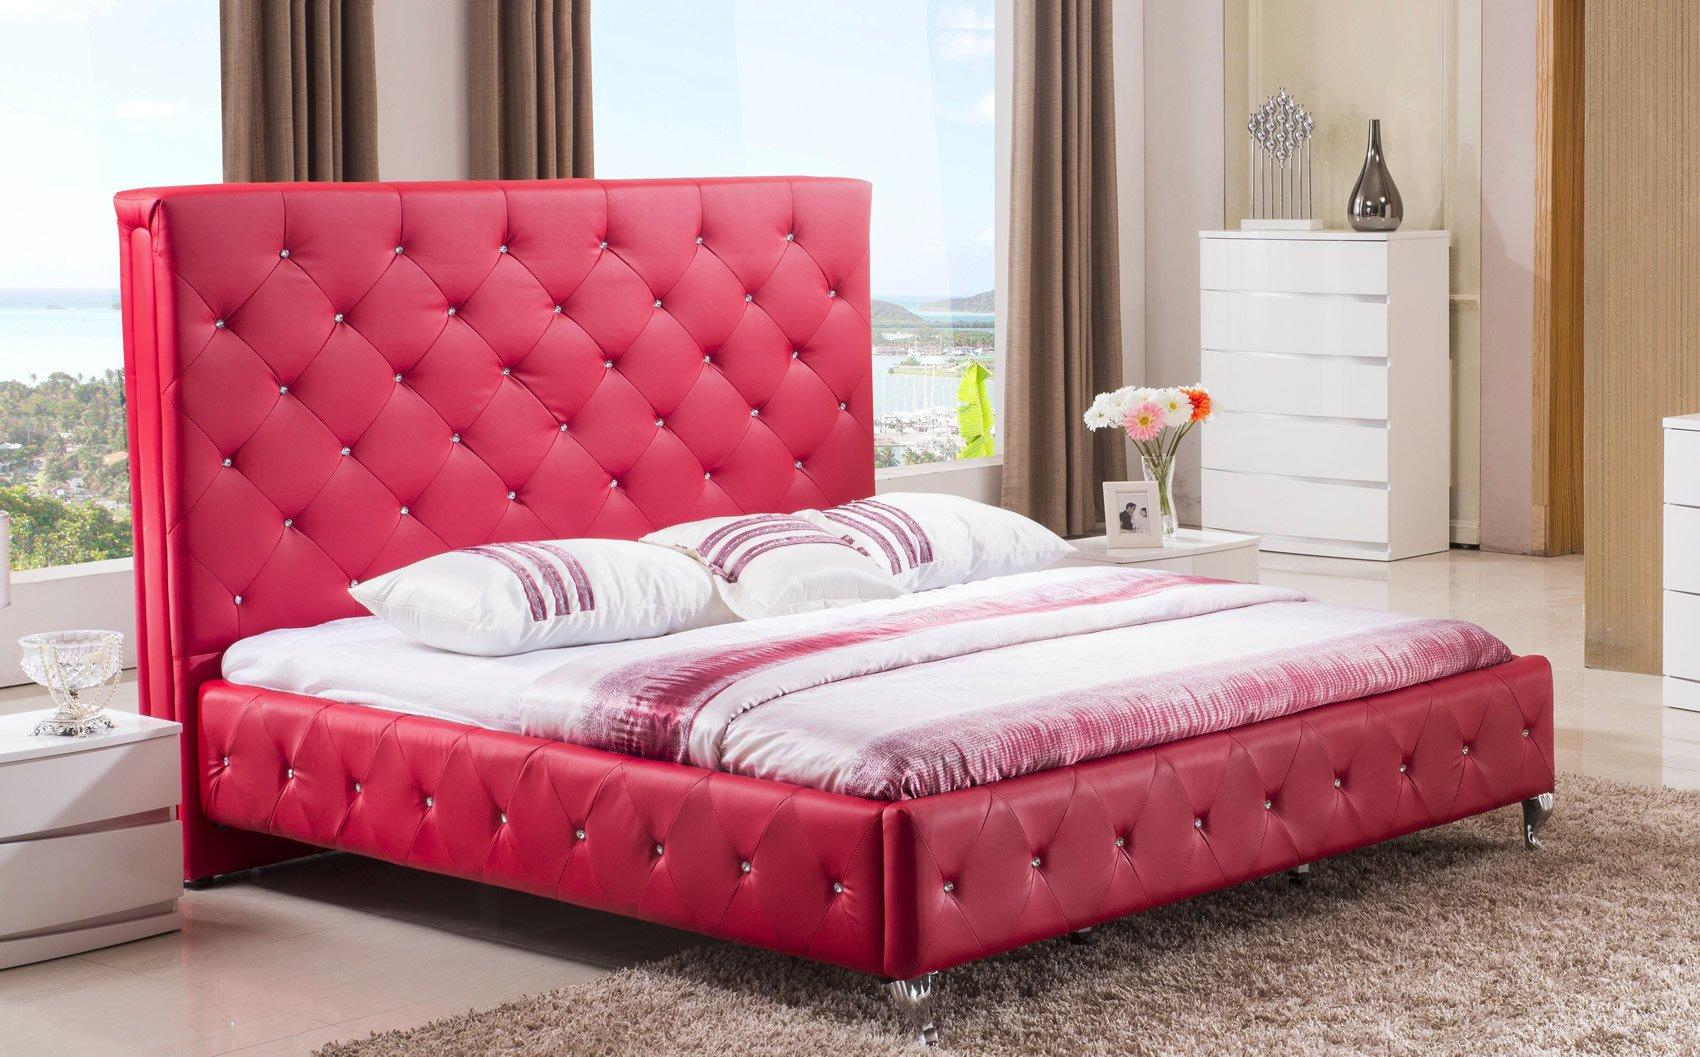 Contemporary, Modern Platform Bedroom Set Rome & Wynn ROME RED + WYNN - WHITE-Q-5-PC in White, Red Leatherette